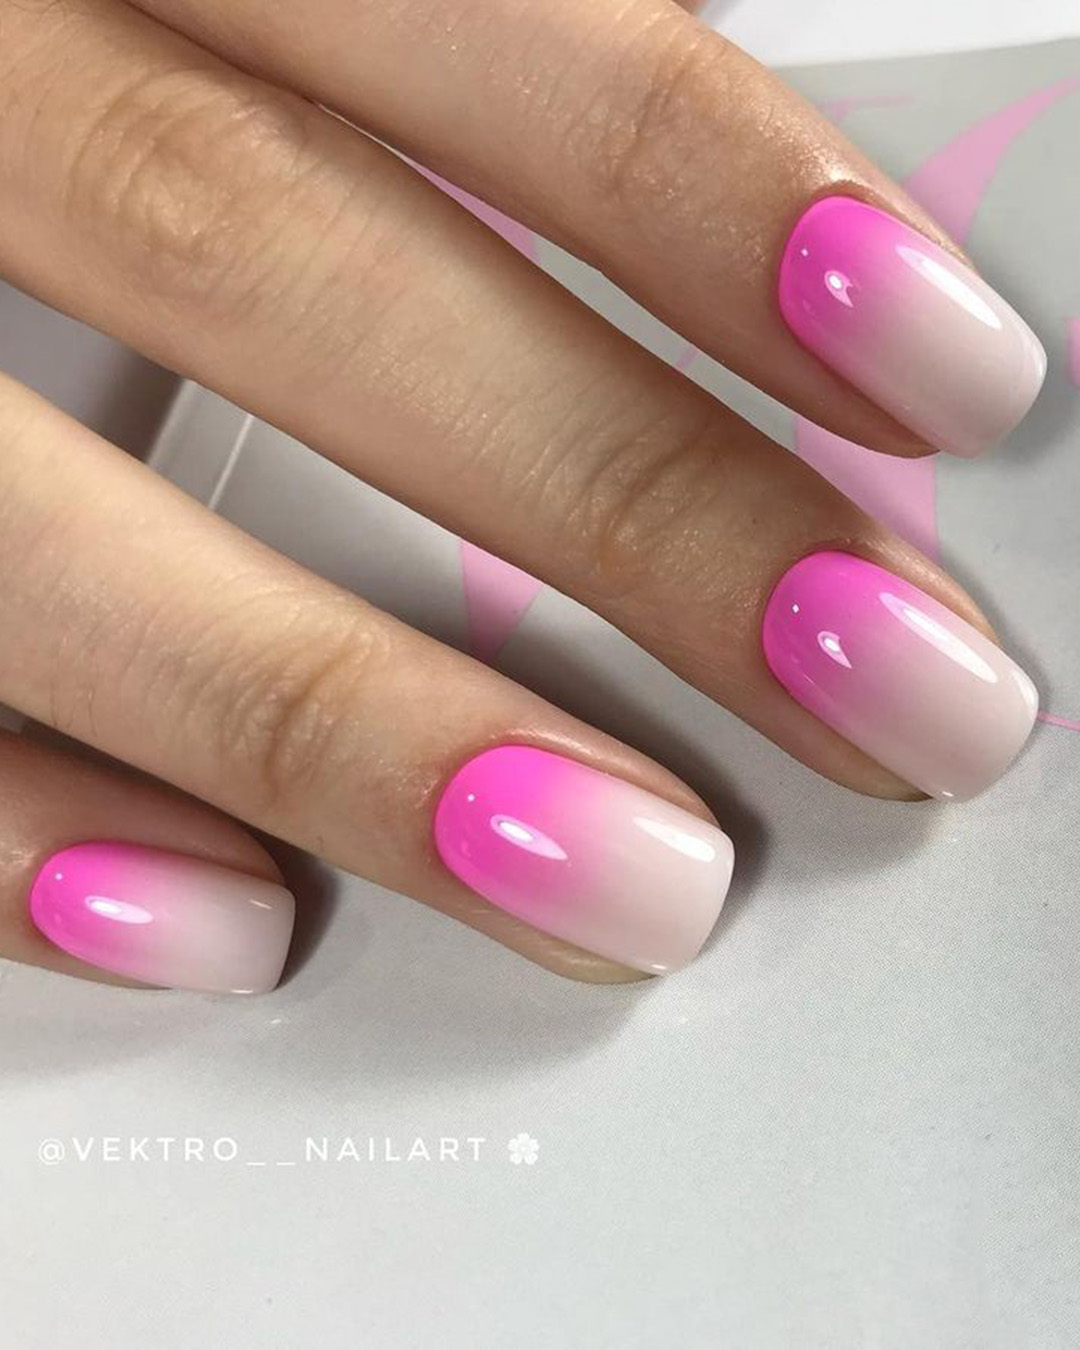 pink and white nails hot ombre simple vektro__nailart